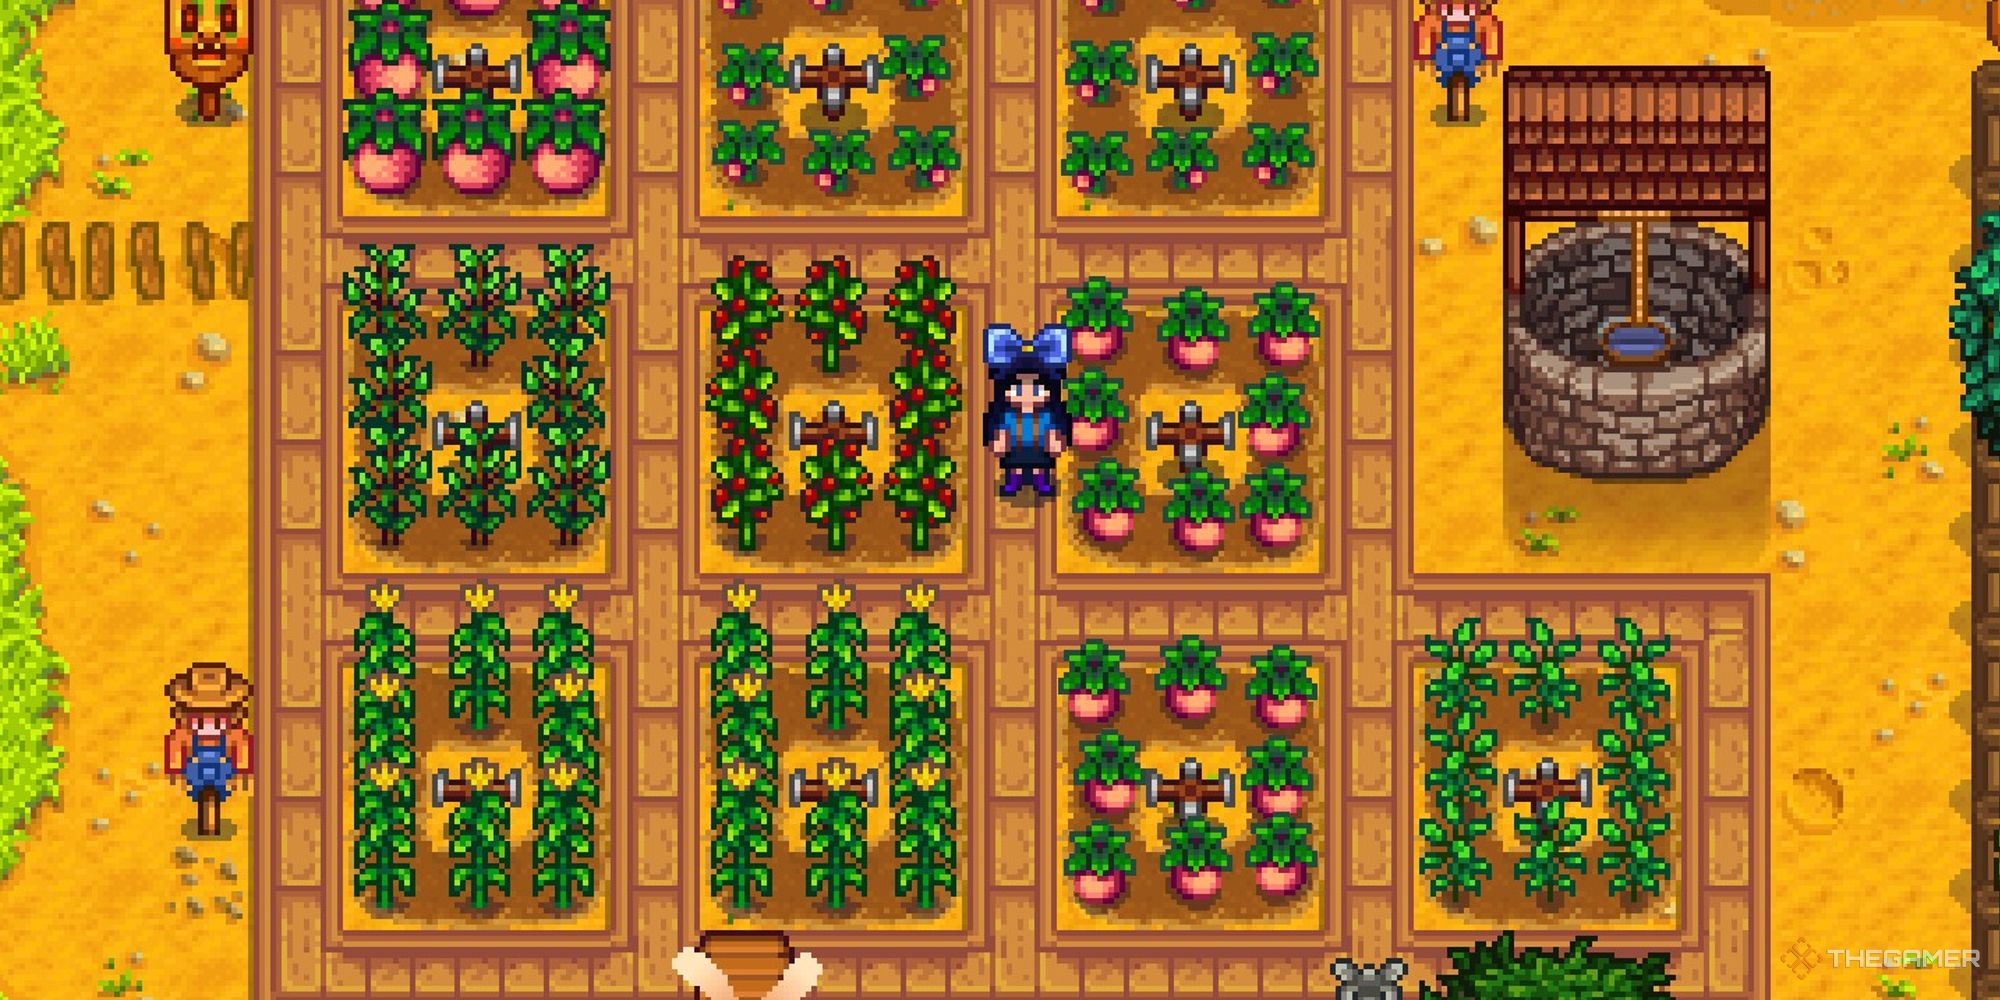 stardew valley player standing in crop area of farm during th summer